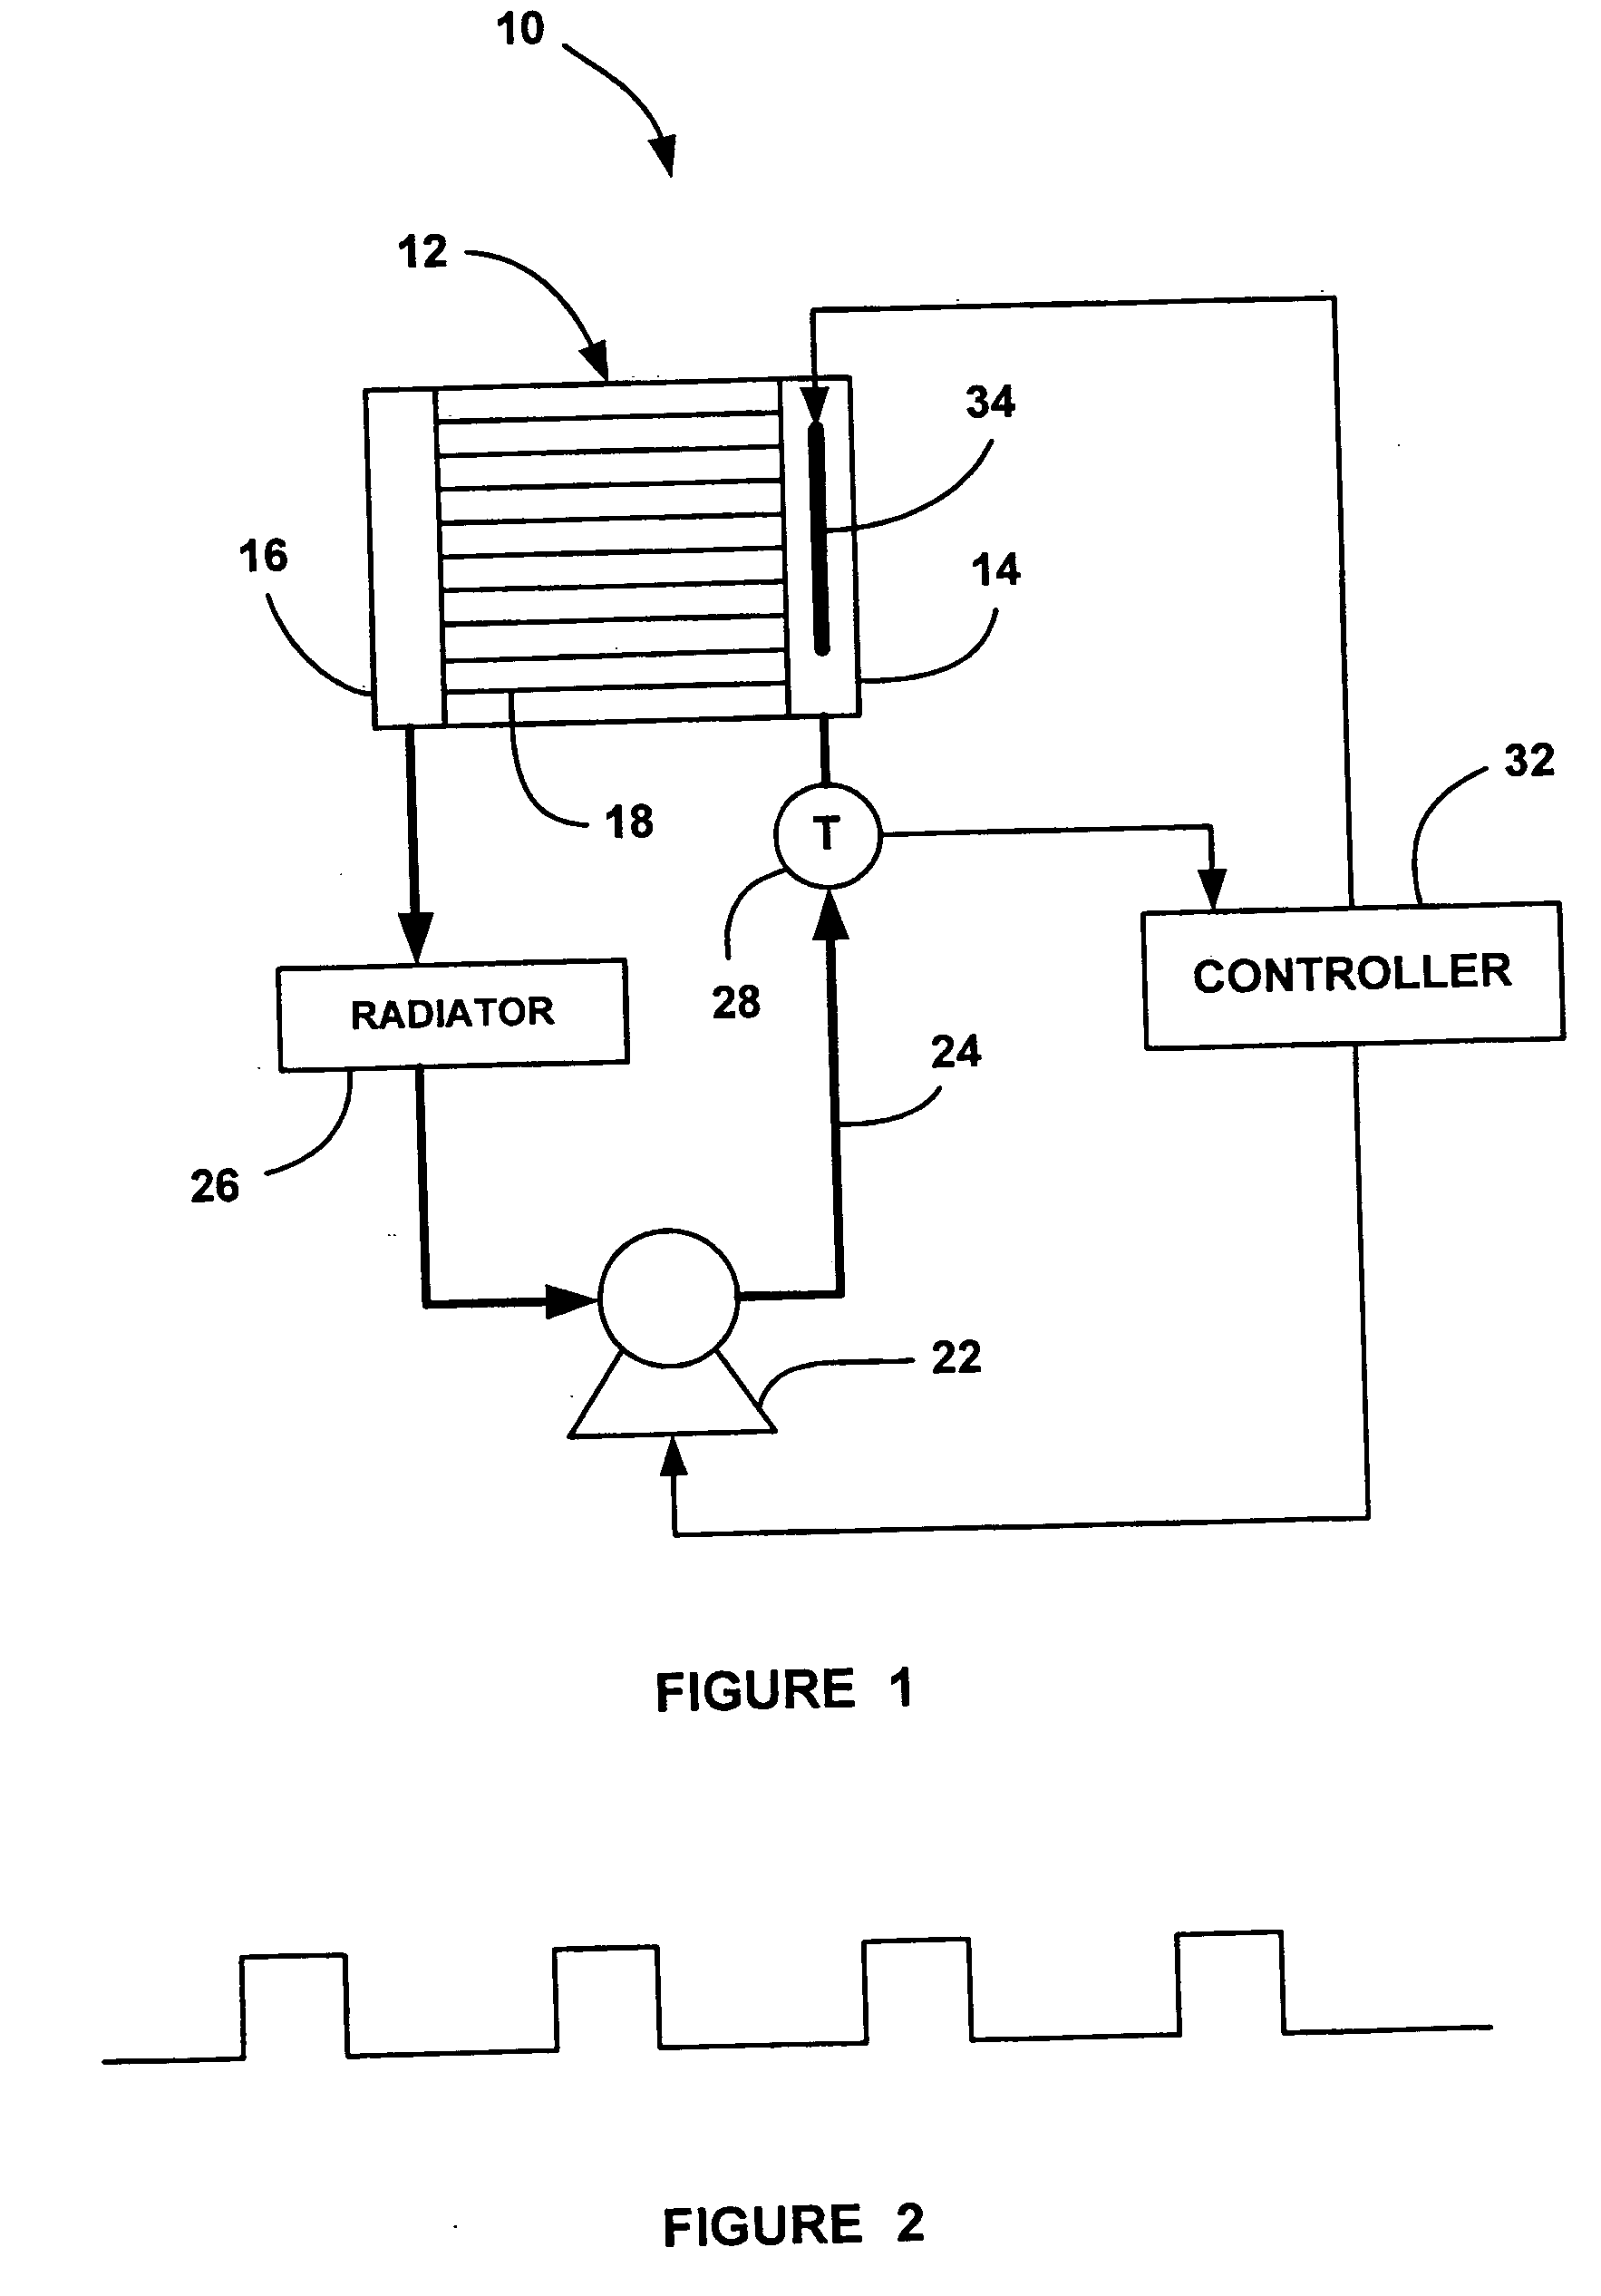 Pulsed coolant control for improved stack cold starting